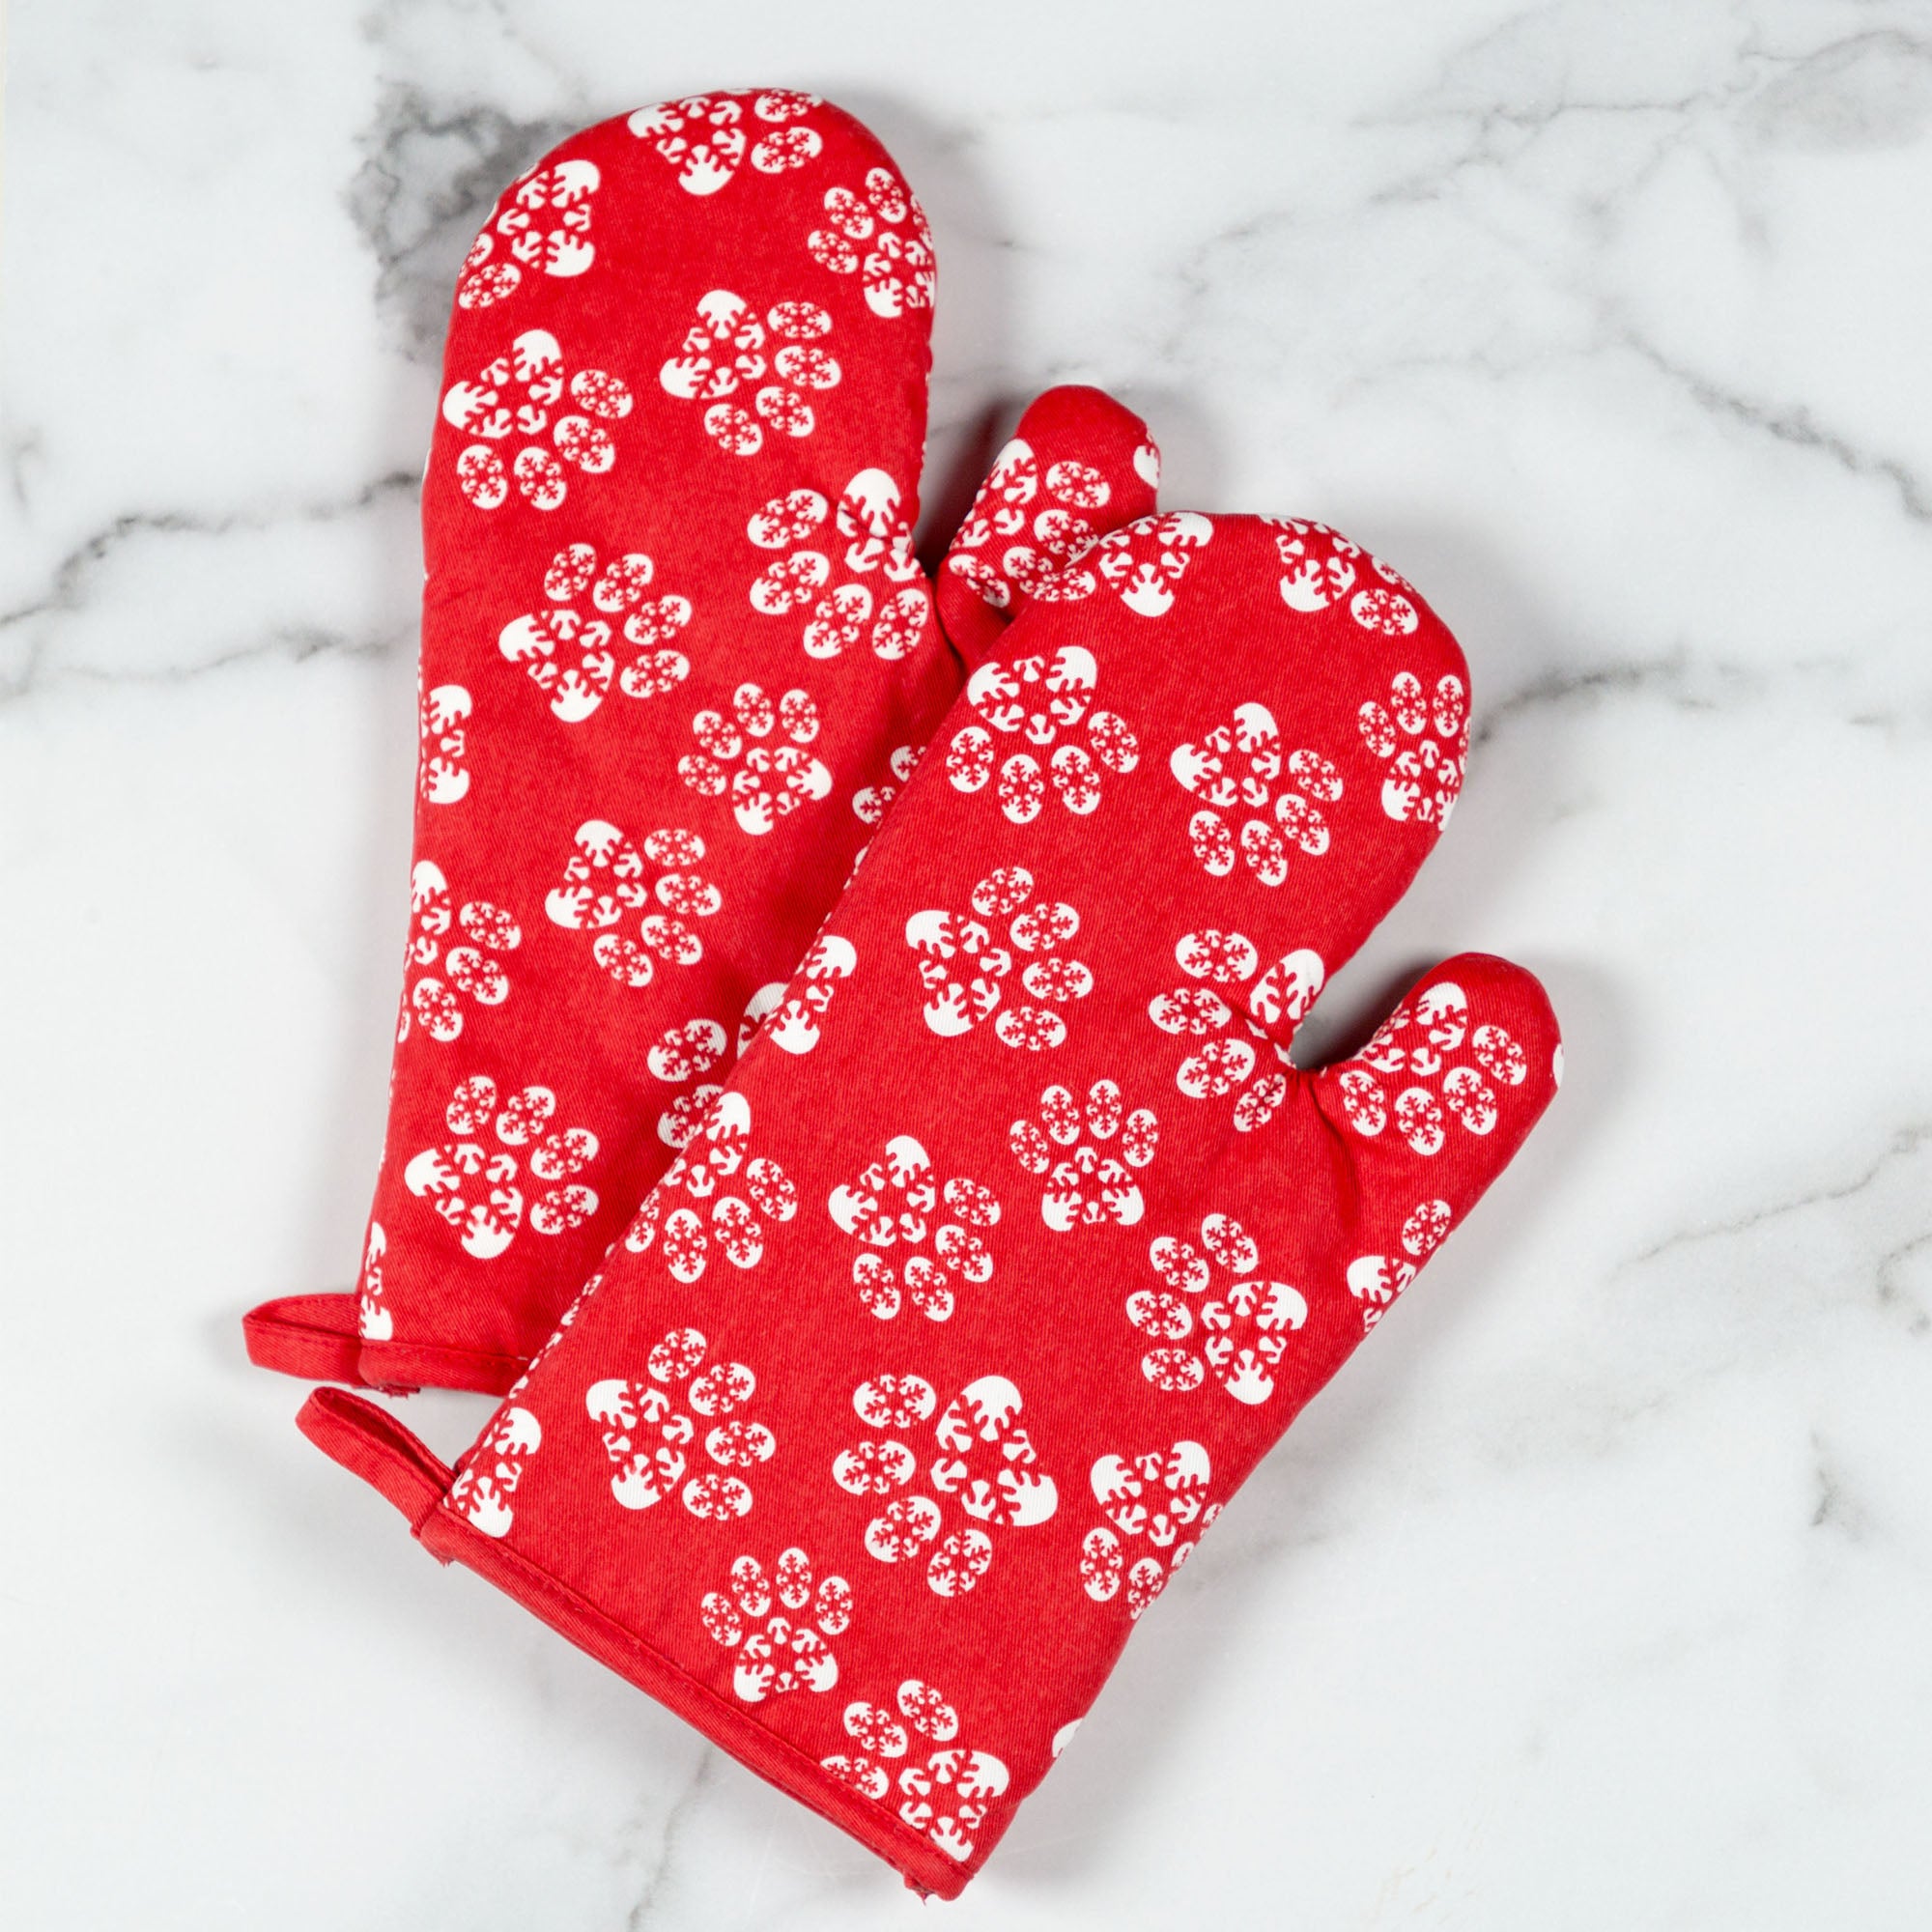 Festival Pets 100% Cotton Oven Mitts , Dog Oven Mitts , Cat Oven Mitts - Snowflakes